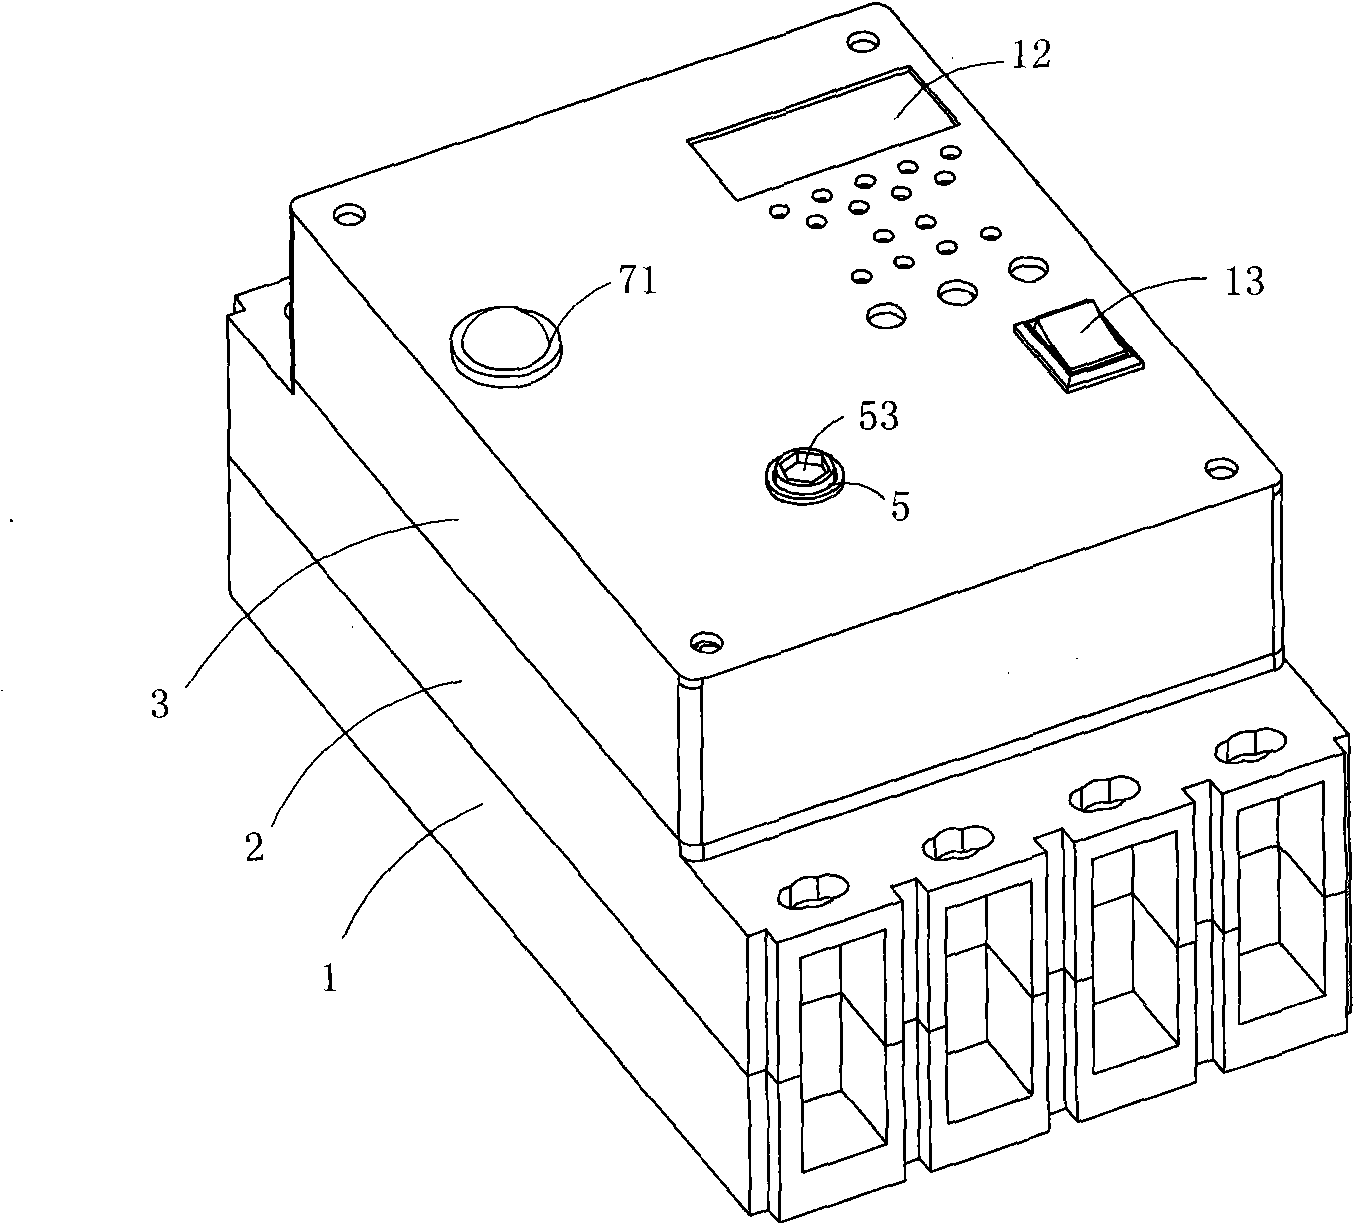 Molded case circuit breaker comprising on and off indicating mechanism